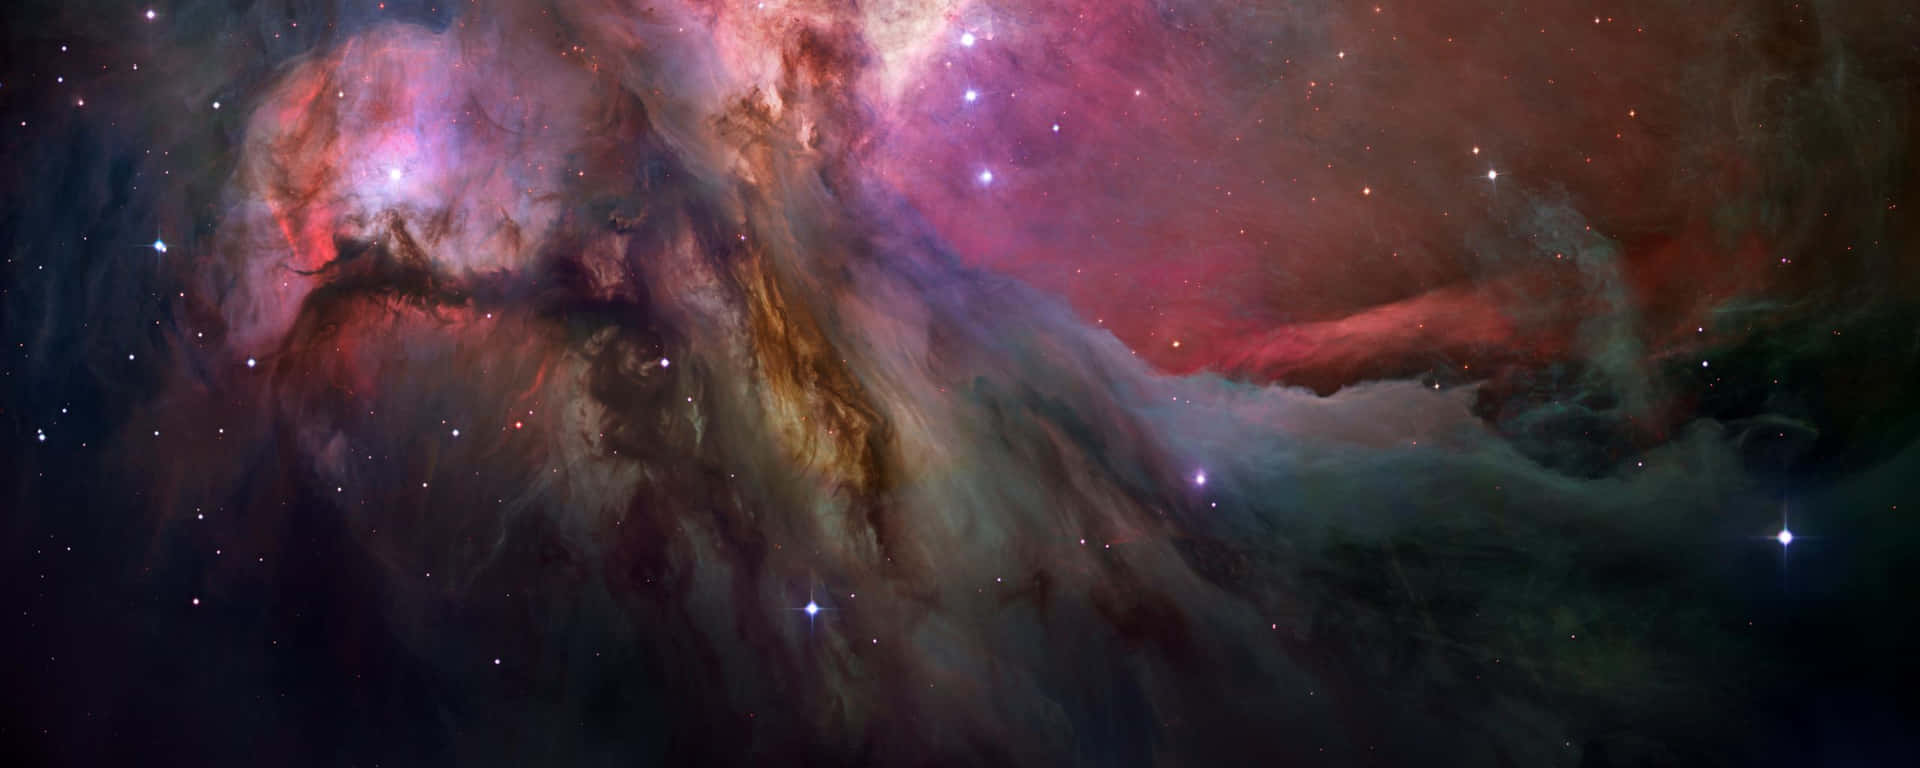 "Astronomical Magnificence: A stunning image of star formation from the Hubble Telescope" Wallpaper